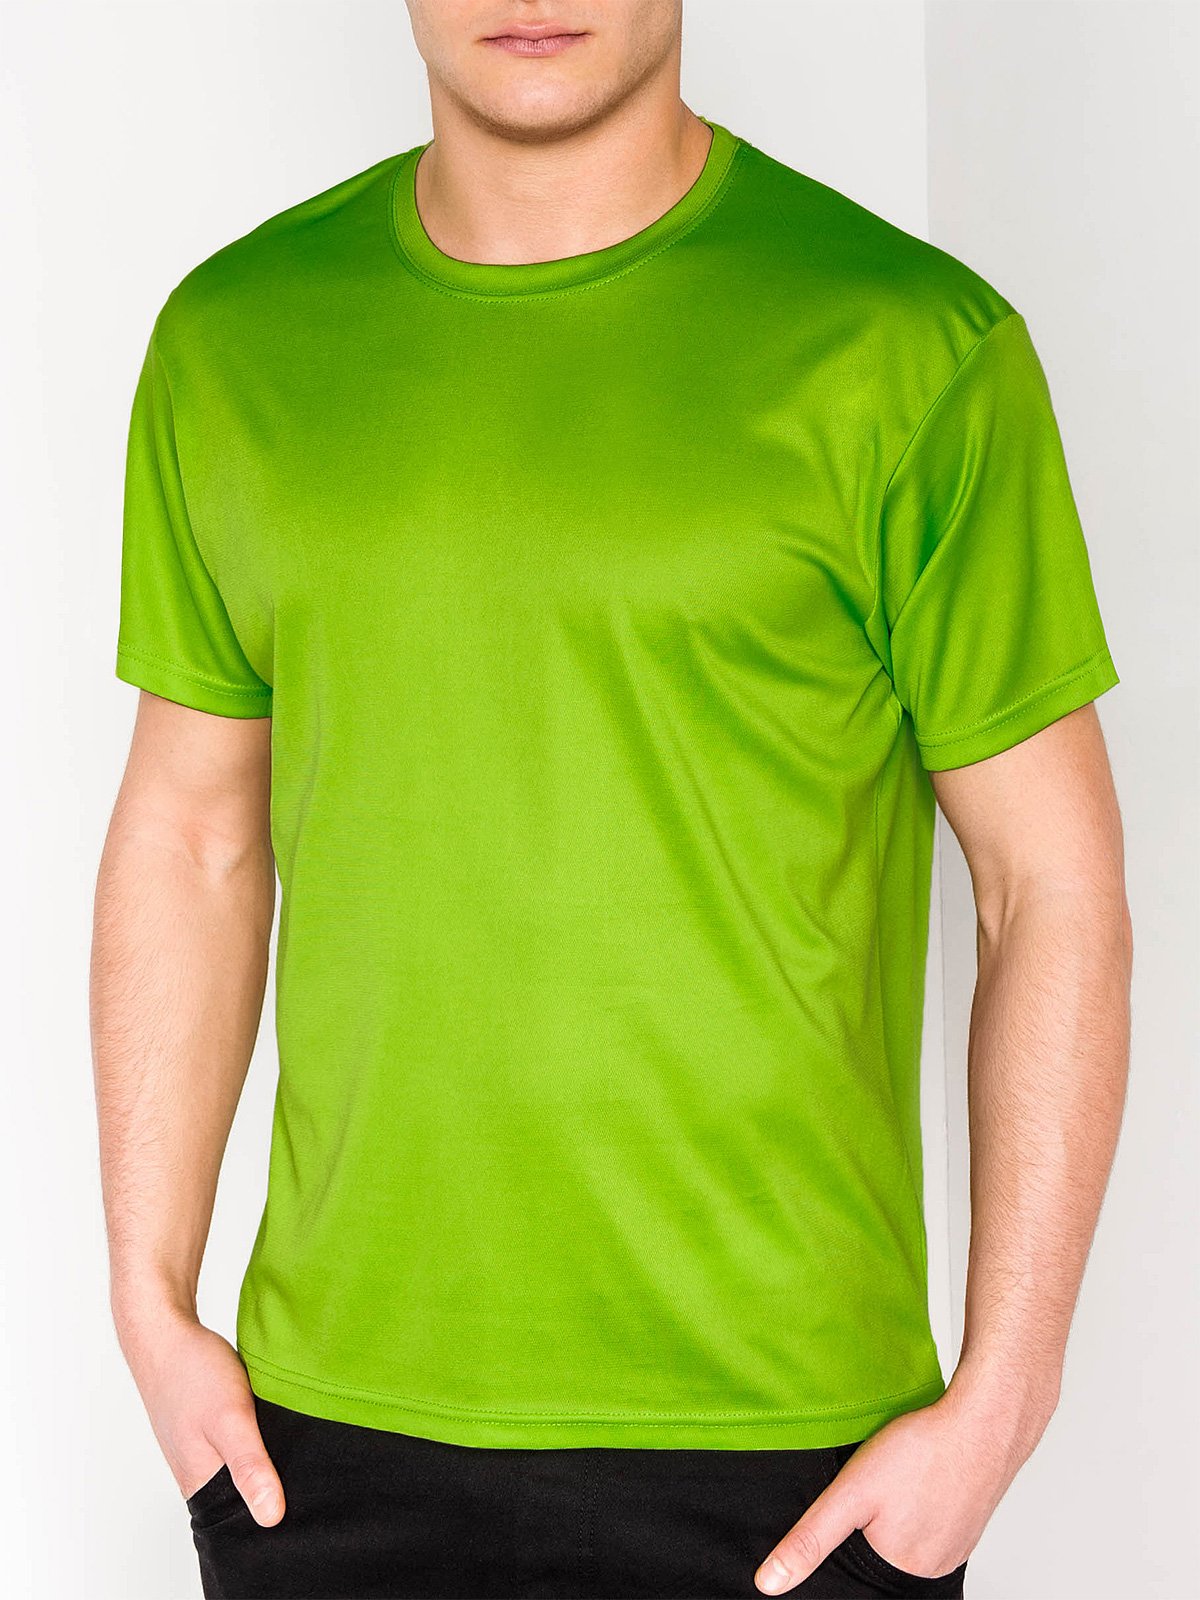 PRINTED MEN'S T-SHIRT S883 - LIME | MODONE wholesale - Clothing For Men